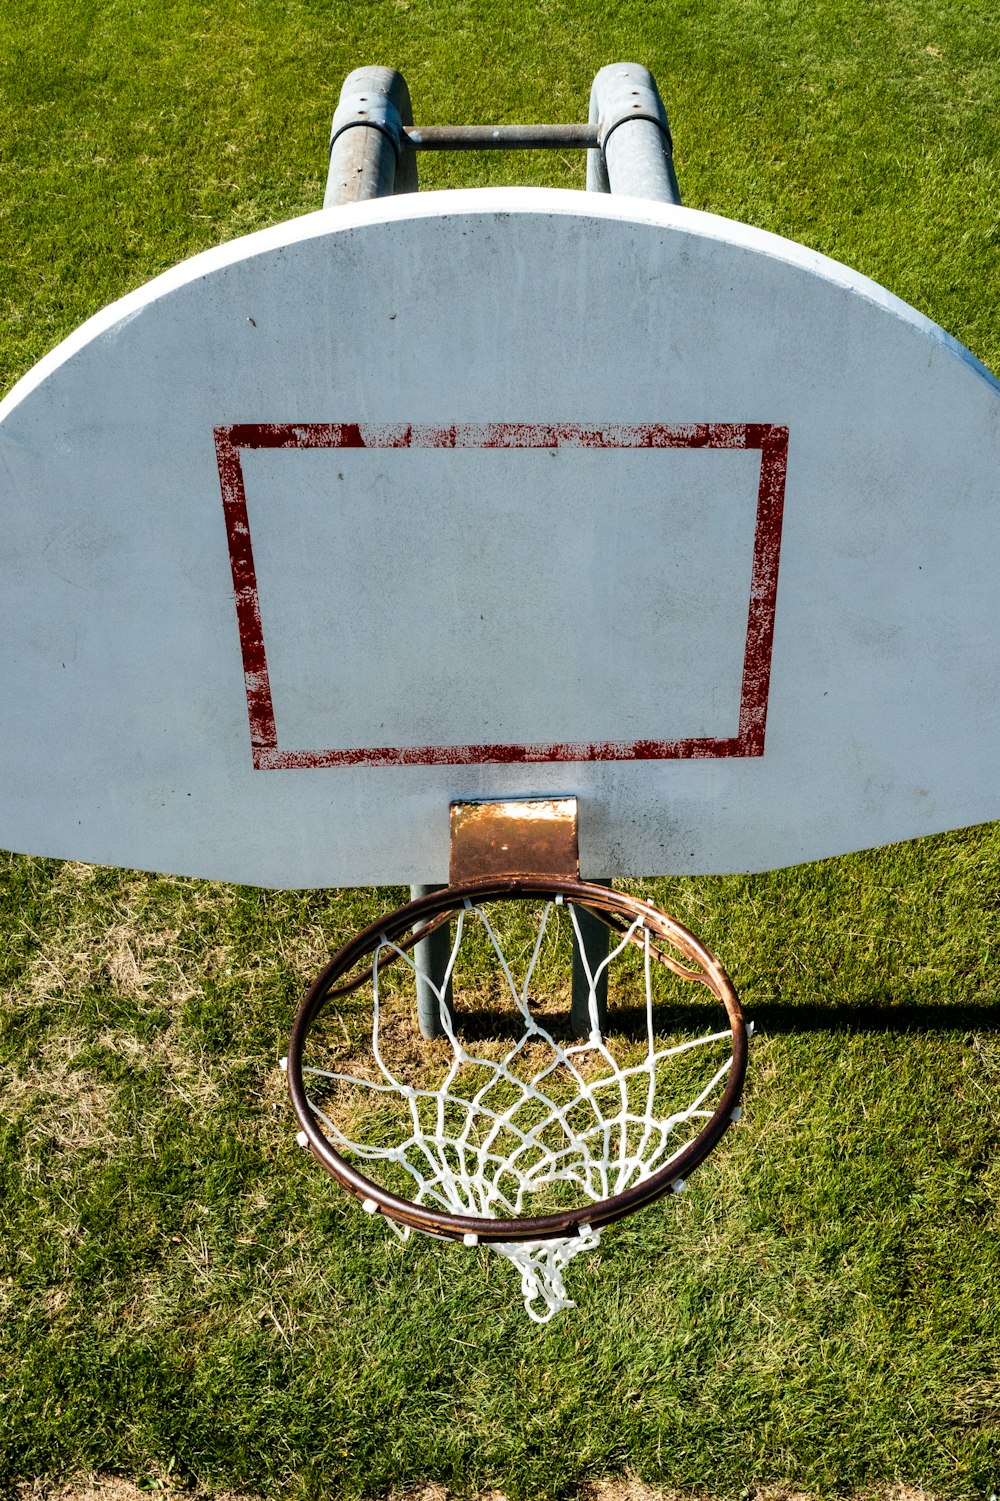 an overhead view of a basketball hoop in the grass